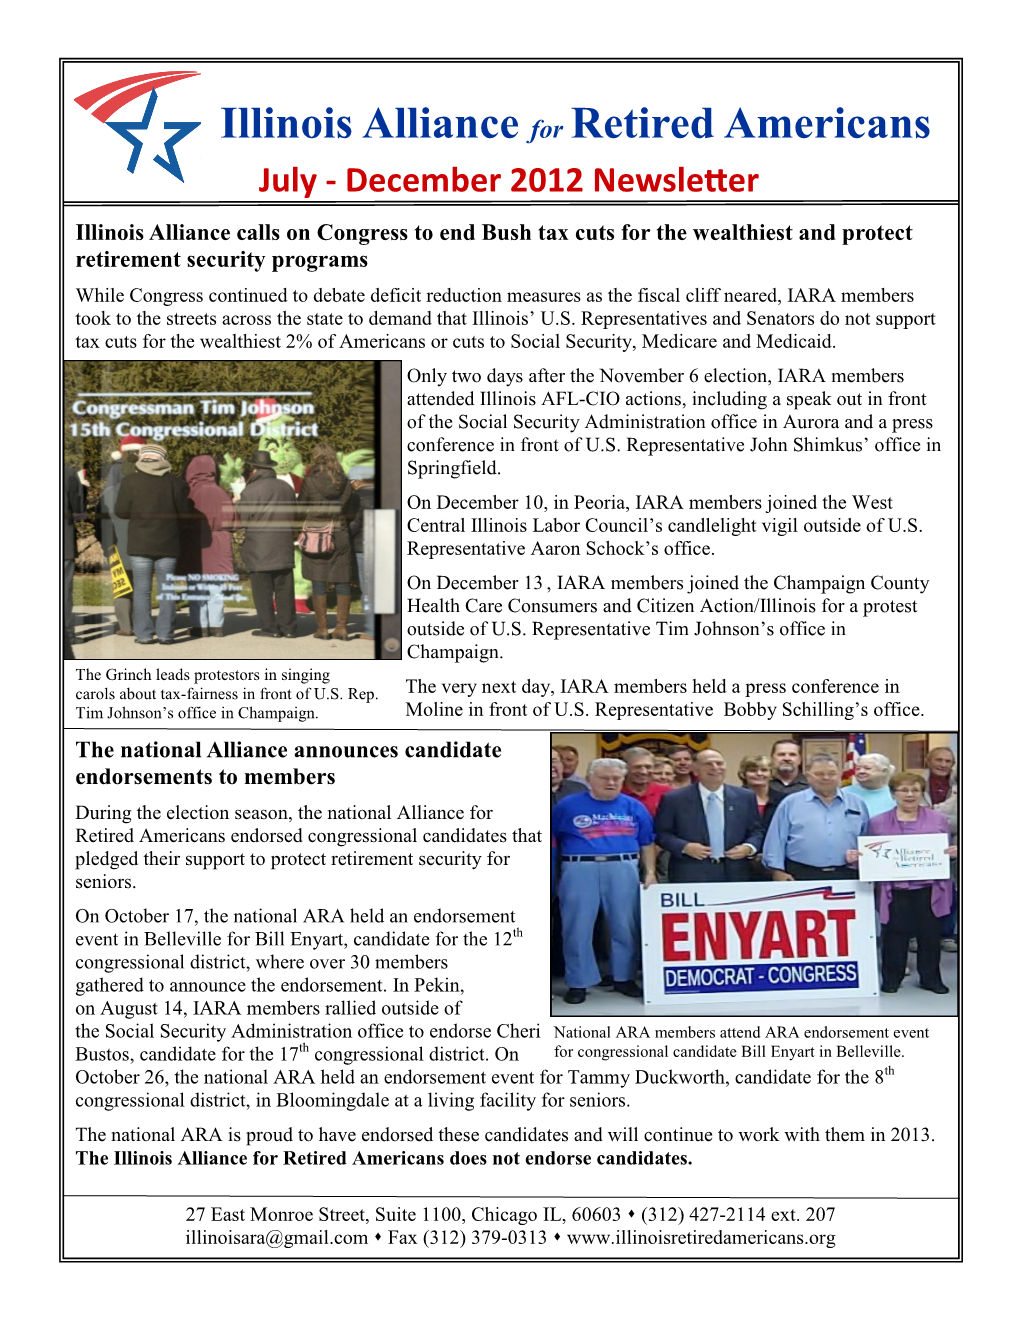 December 2012 Newsletter Illinois Alliance Calls on Congress to End Bush Tax Cuts for the Wealthiest and Protect Retirement Security Programs